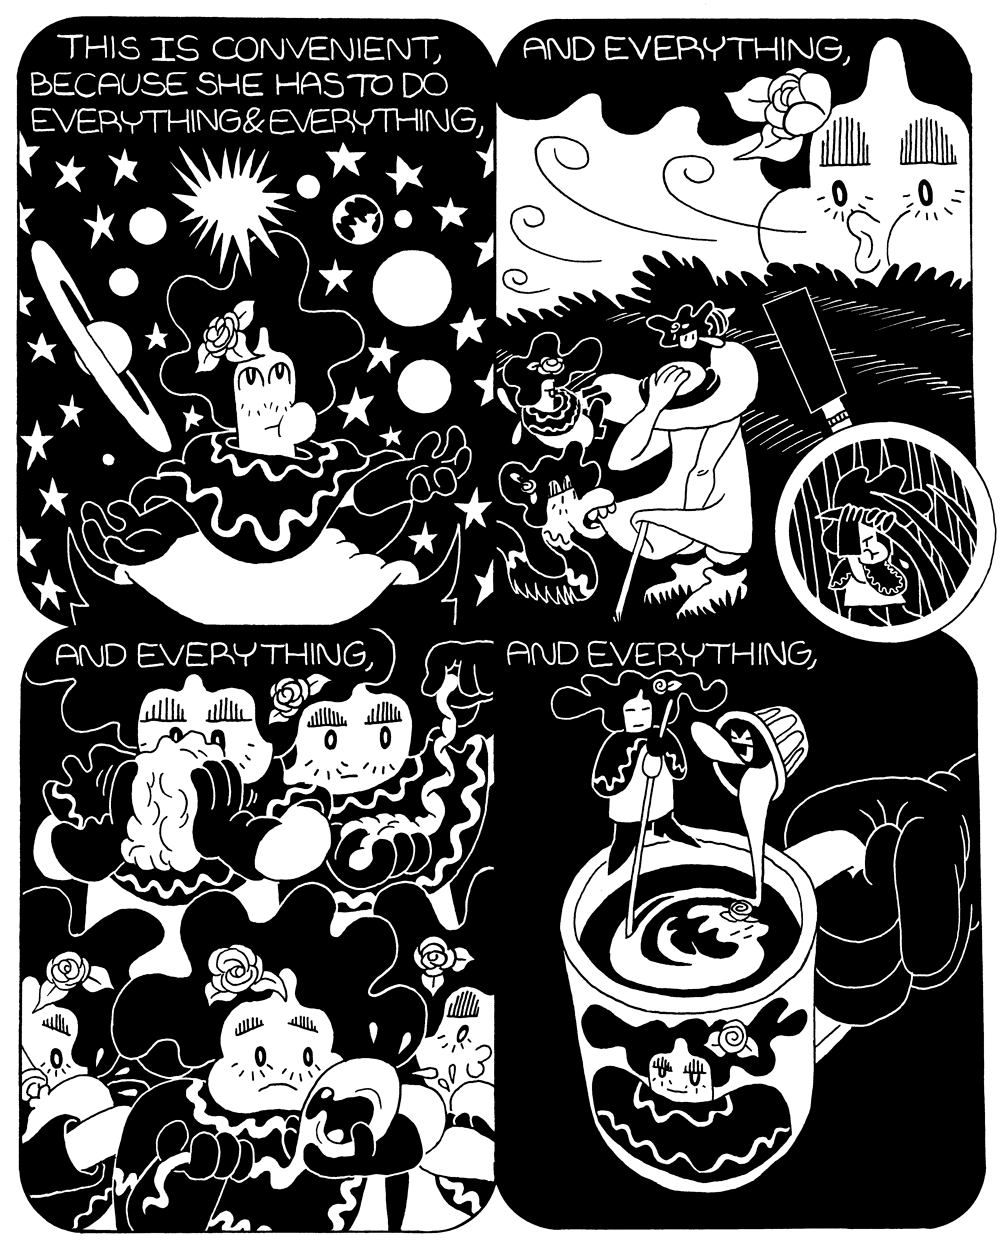 She's Done it All! Part 2 Page 2 by Benjamin Urkowitz for Hazlitt